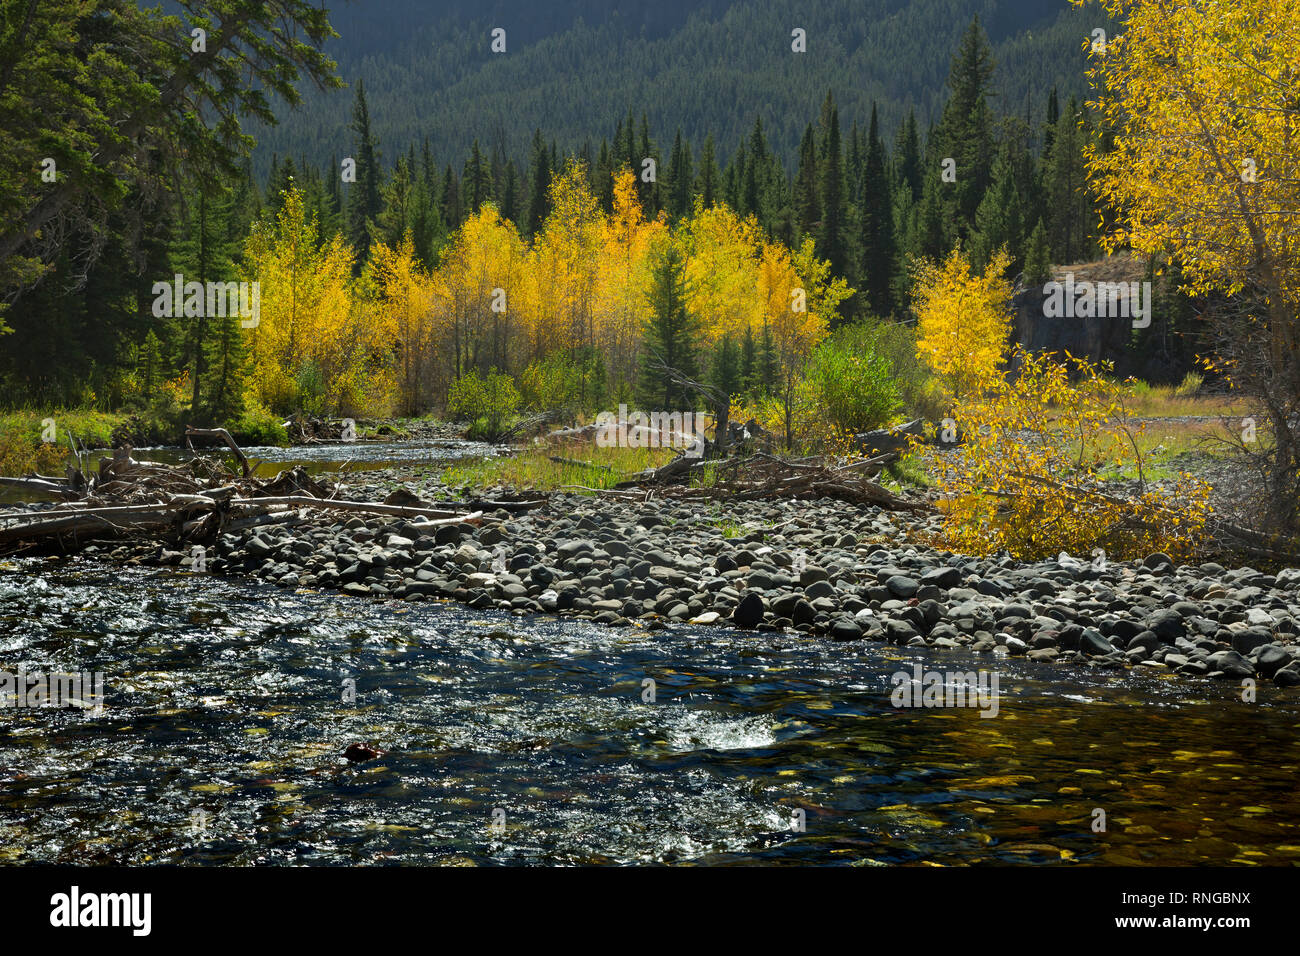 WY03791-00...WYOMING - Fall color along the banks of the Clark Fork of the Yellowstone River in the Shoshone National Forest. Stock Photo